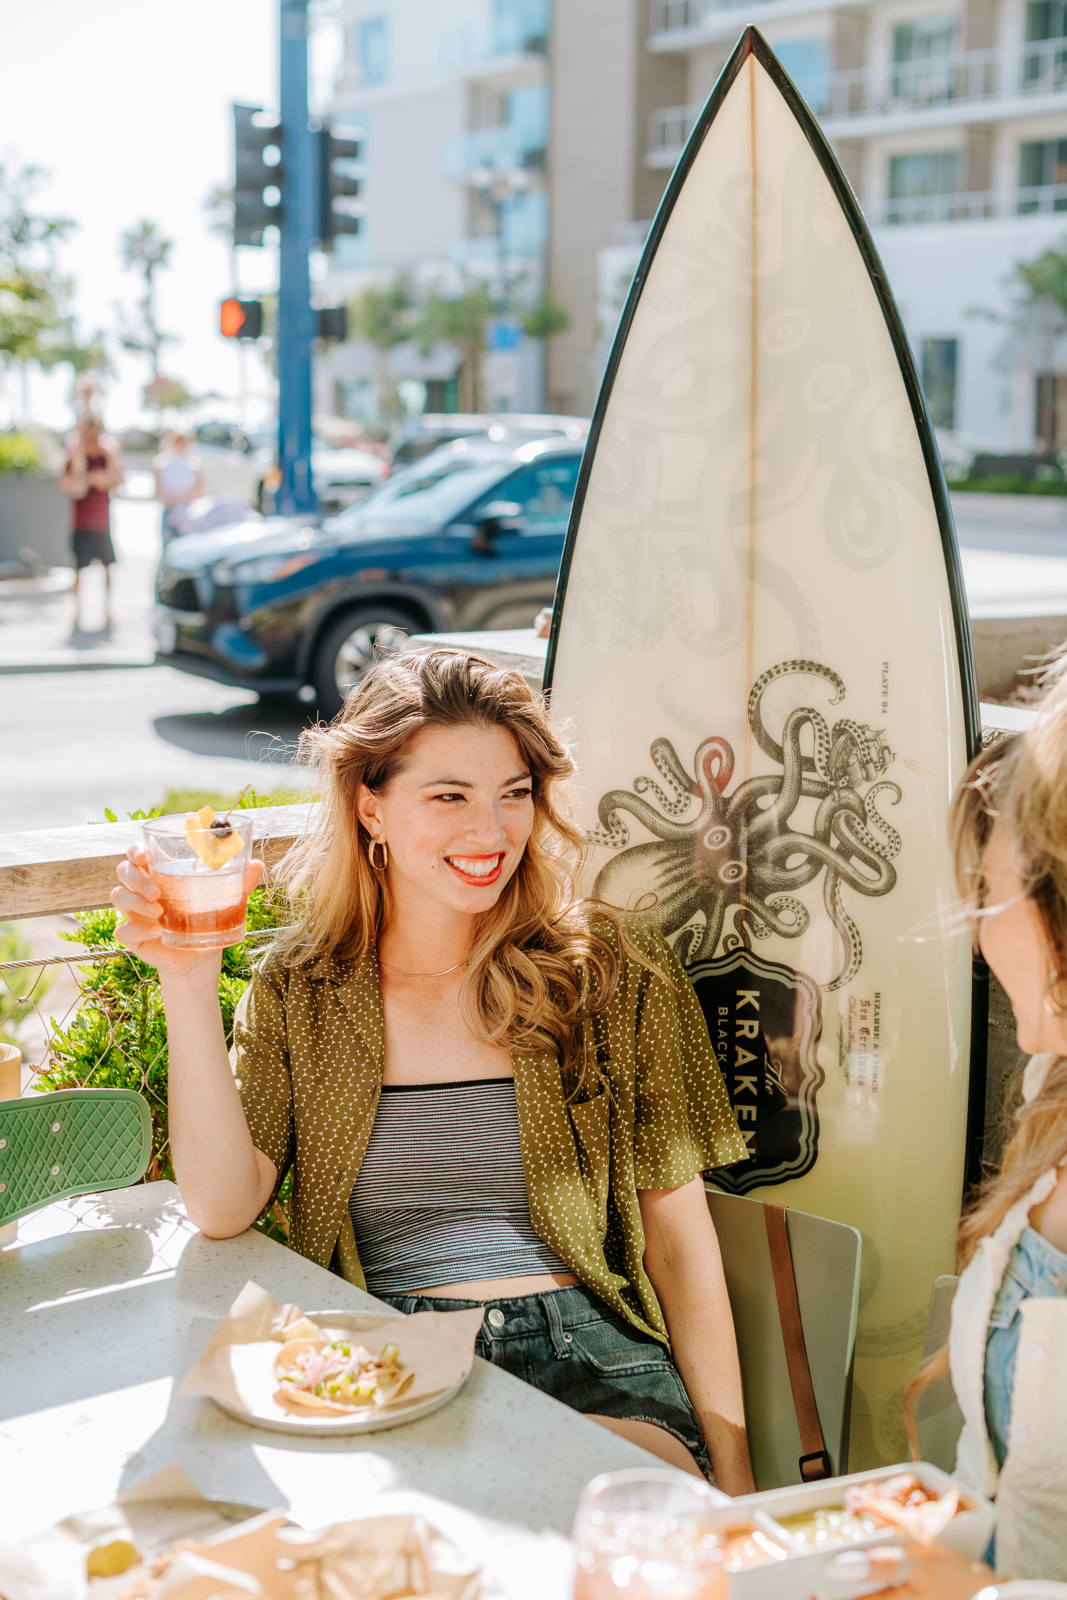 West to East Coast with Hello Betty | Two women drinking on patio by surfboard with kraken print on it | Bethesda, MD | Oceanside, CA